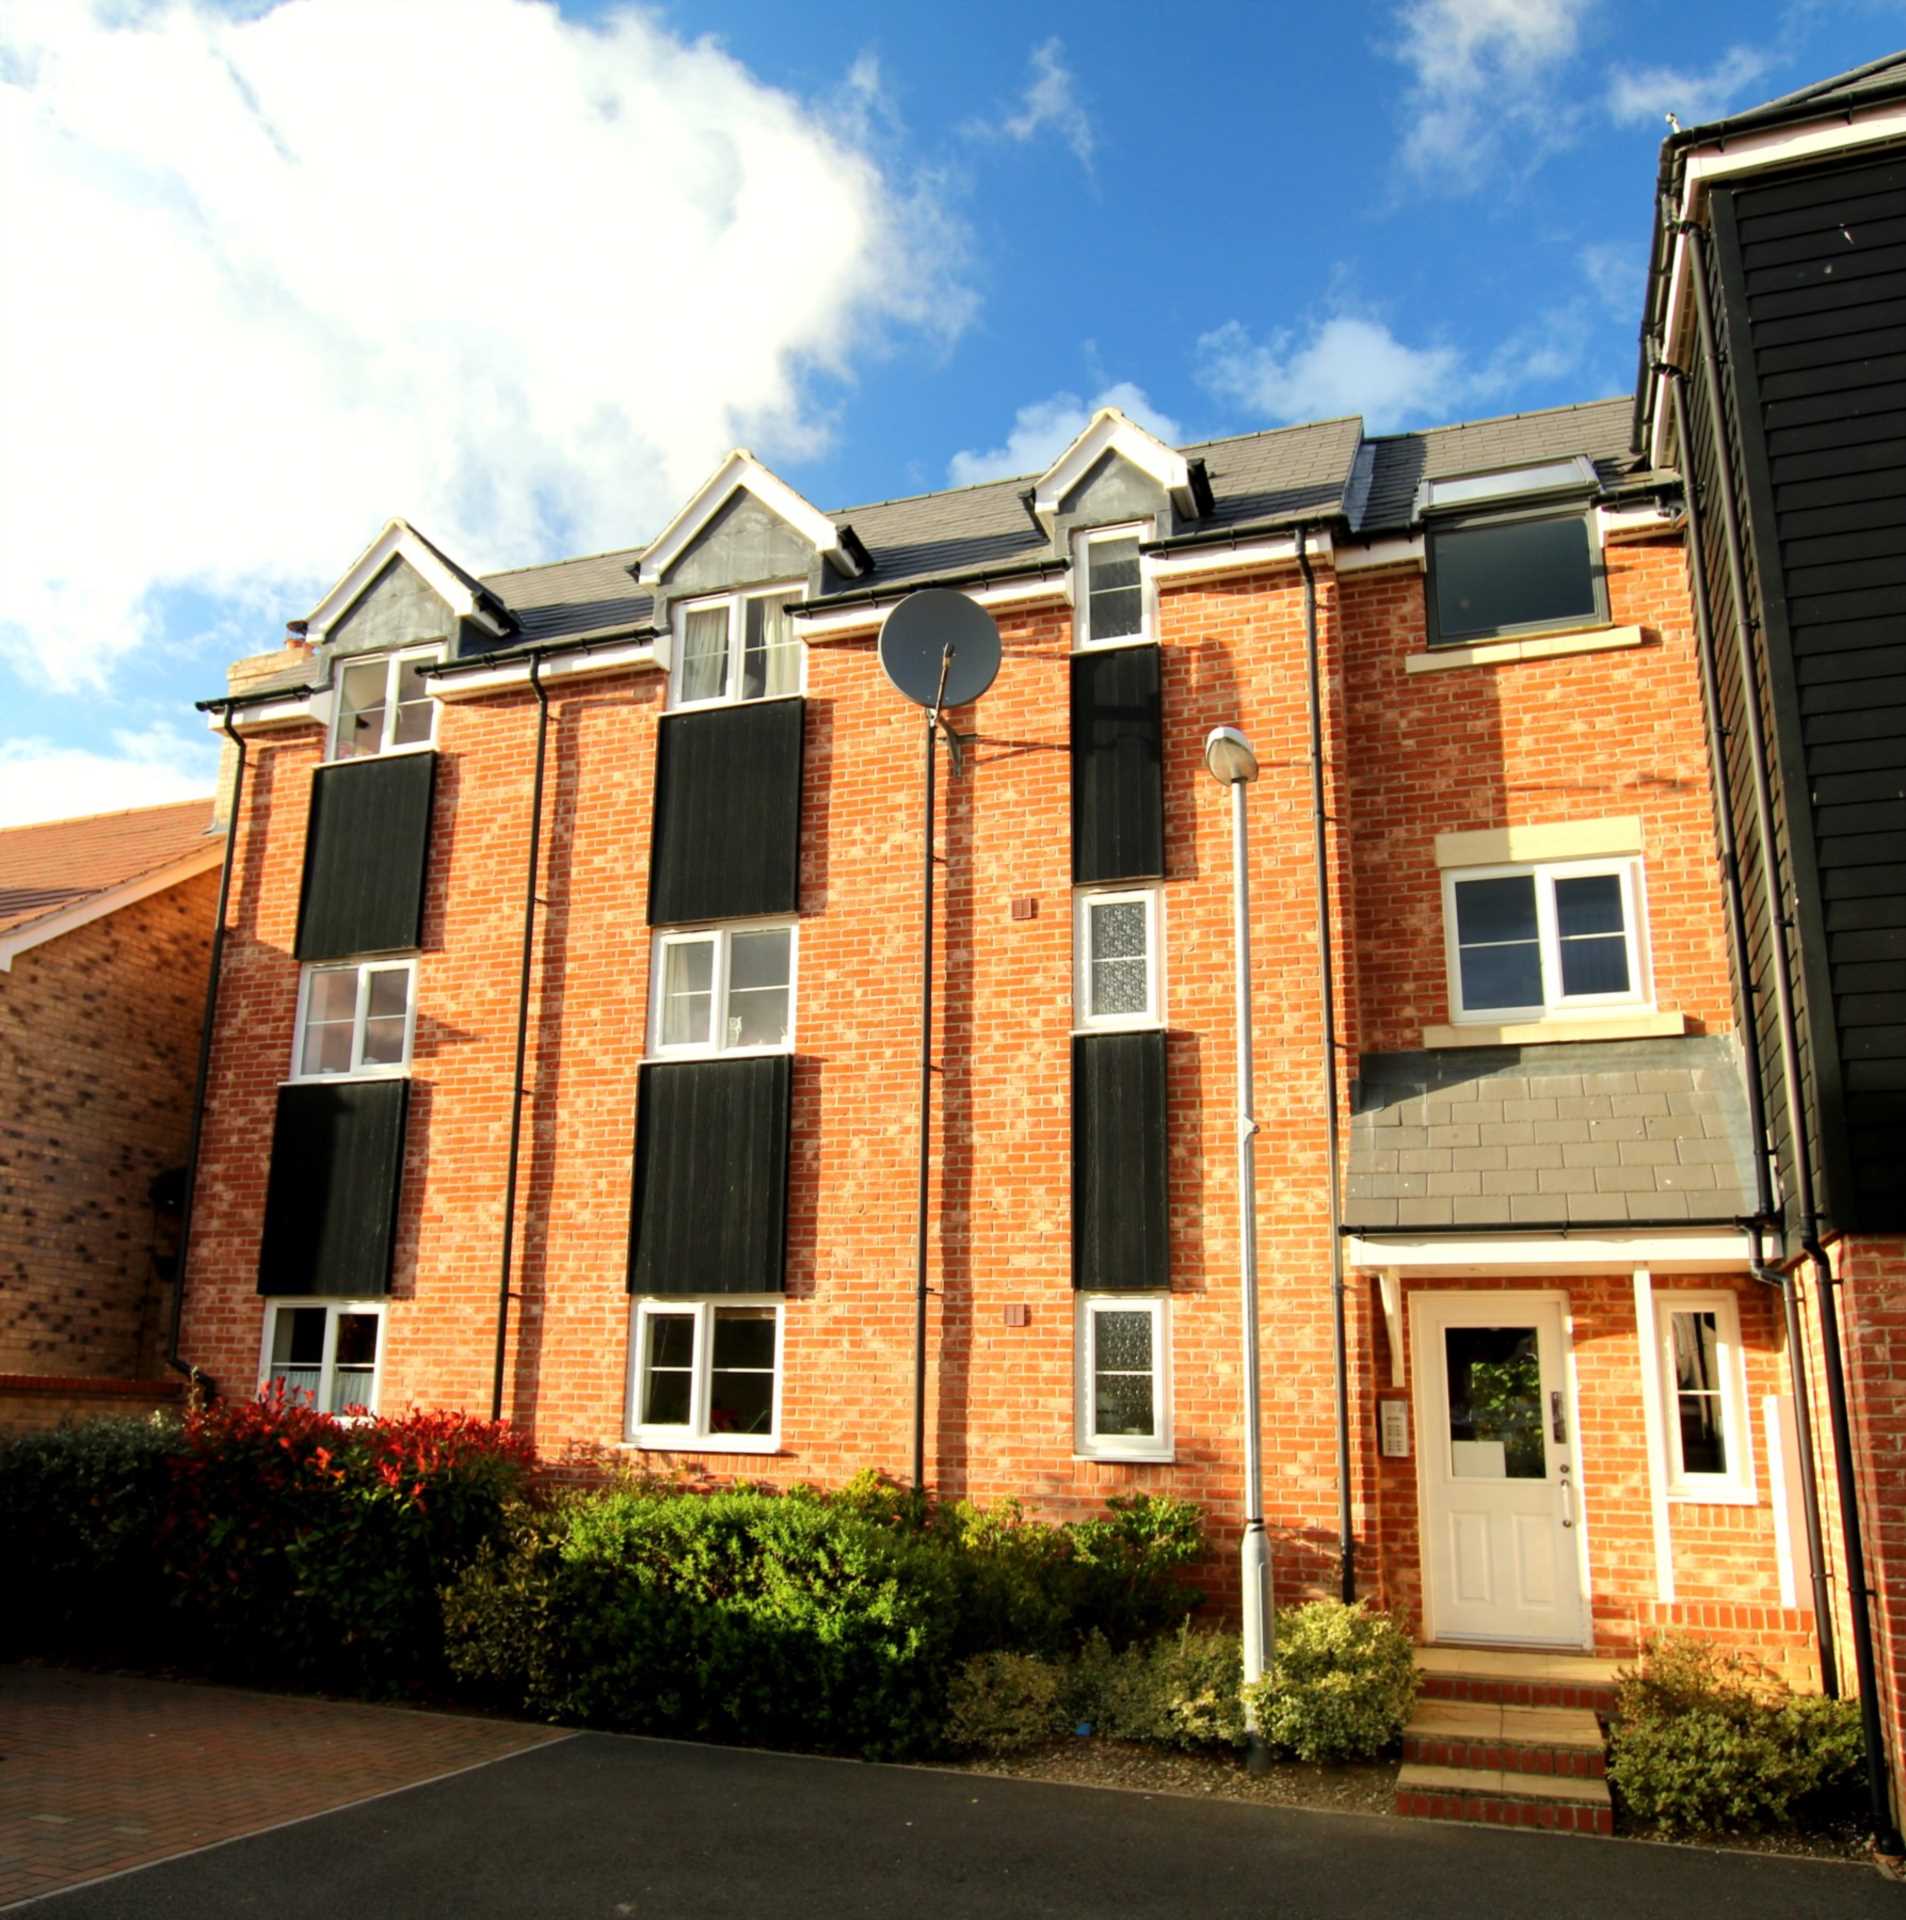 2 bed Apartment for rent in St Neots. From Noonan Crane Property Management